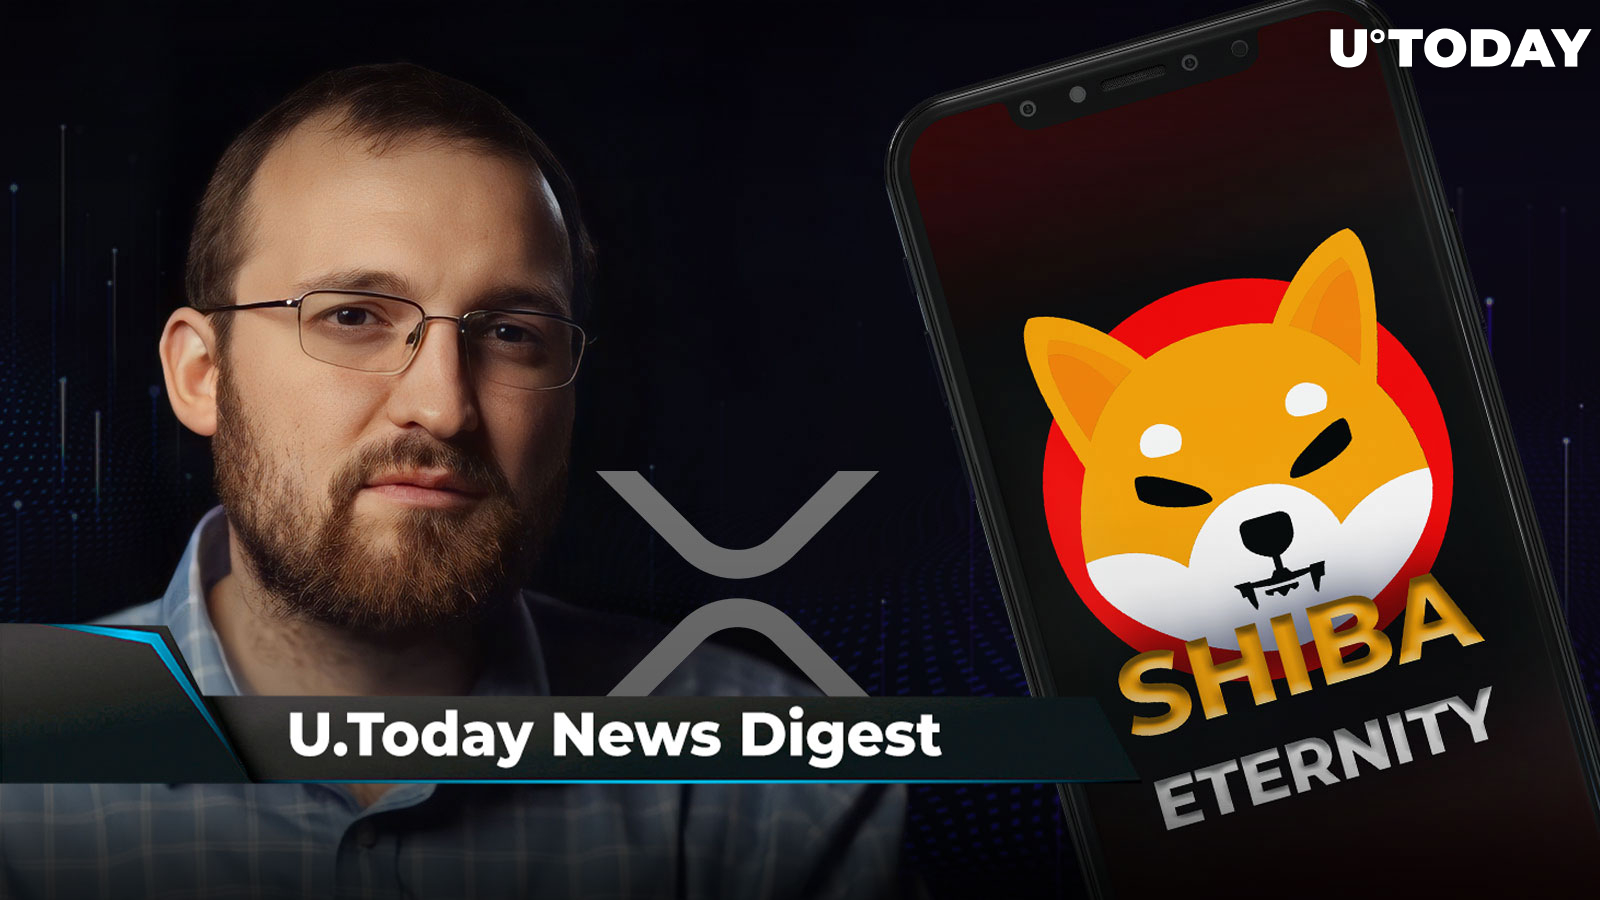 Charles Hoskinson Believes XRP to Be Commodity, Shiba Eternity Sets Historic Record, Ripple Keeps Hiring Amid Bear Market: Crypto News Digest by U.Today